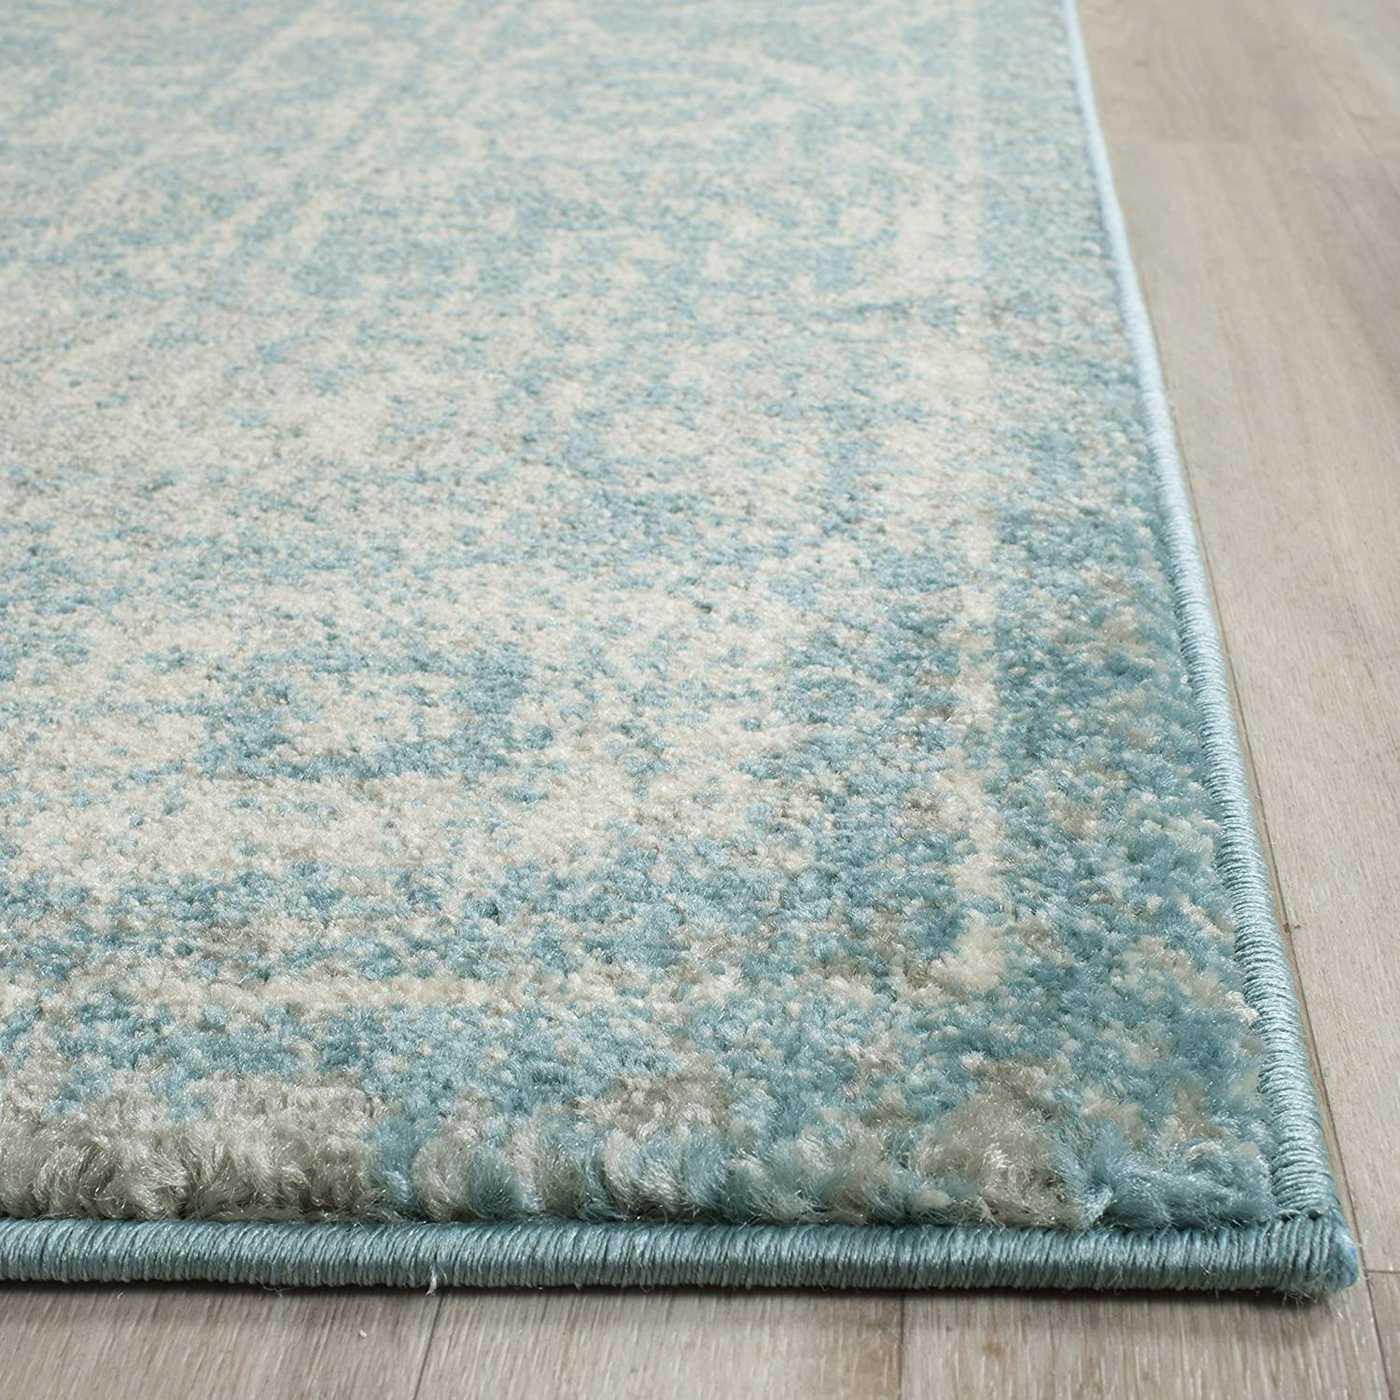 Safavieh Evoke Collection EVK270Z Shabby Chic Distressed Non-Shedding Stain Resistant Living Room Bedroom Accent Rug, 2'2" x 4', Silver / Ivory